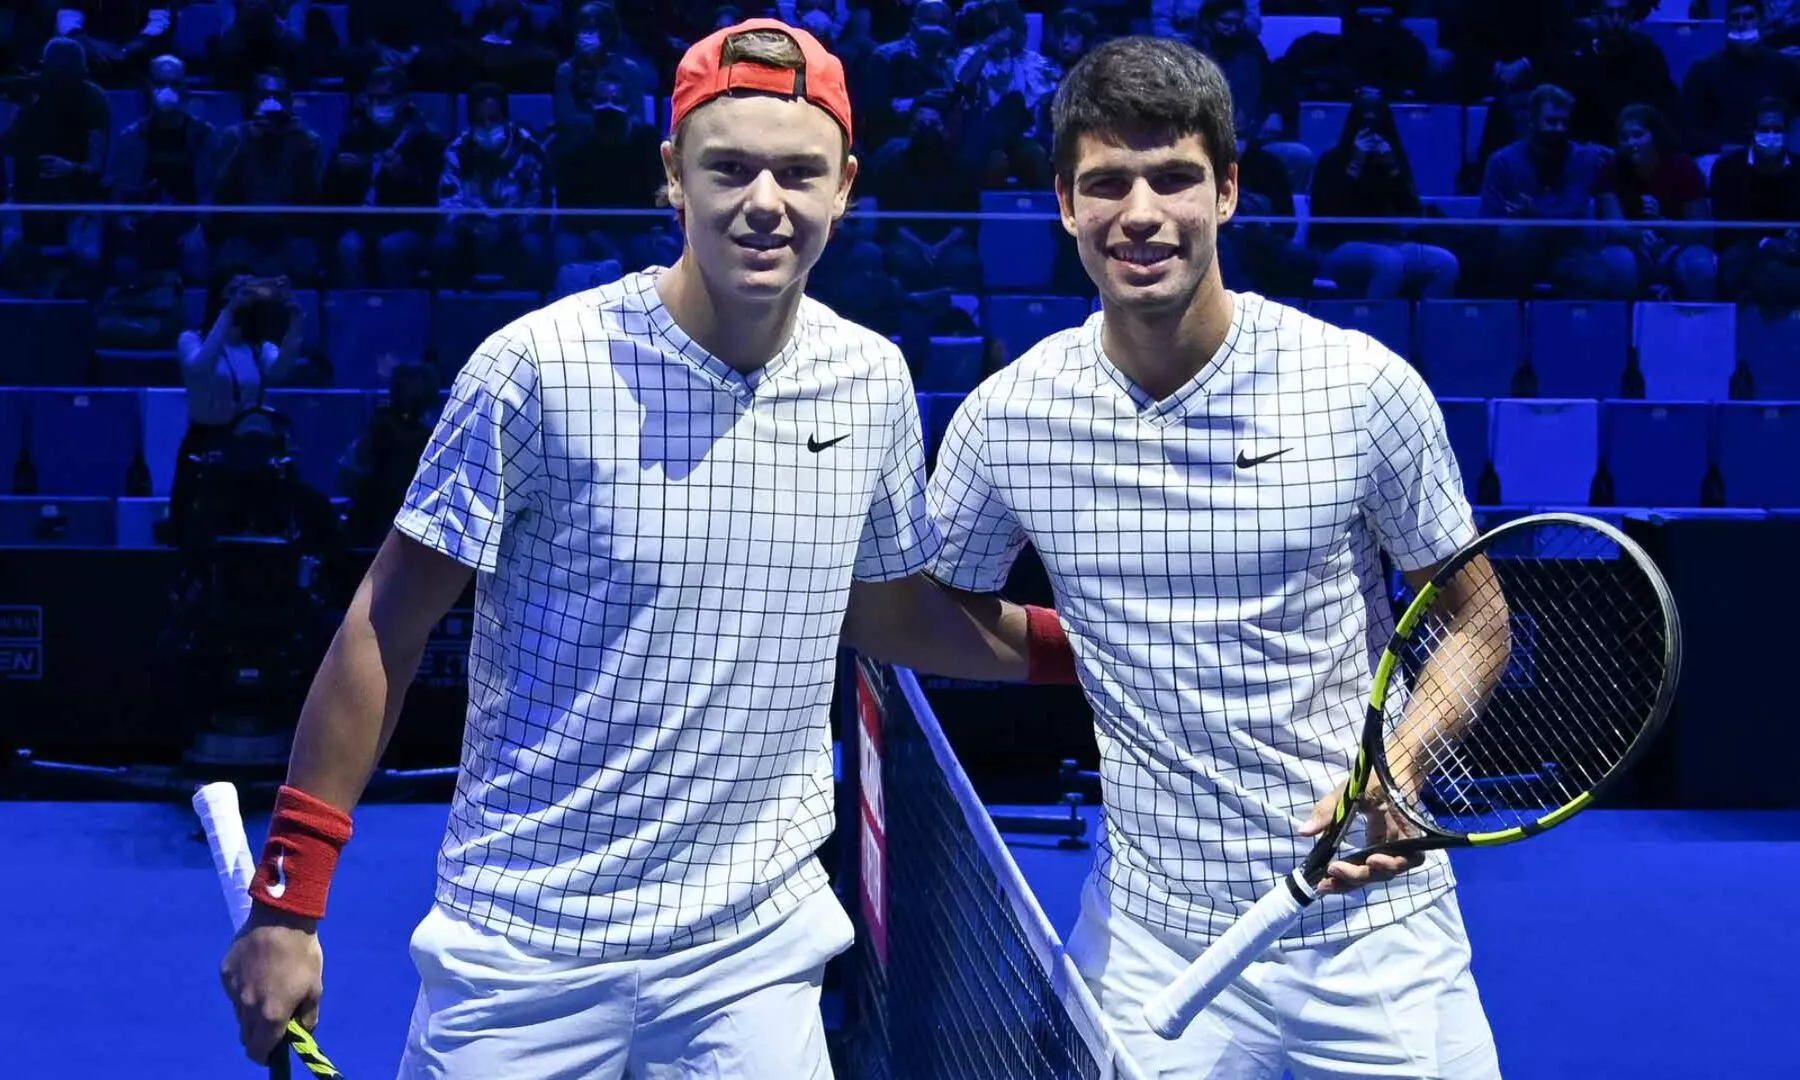 Carlos Alcaraz, Holger Rune repeat 23-year-old unique ATP Finals feat by qualifying for this year's event